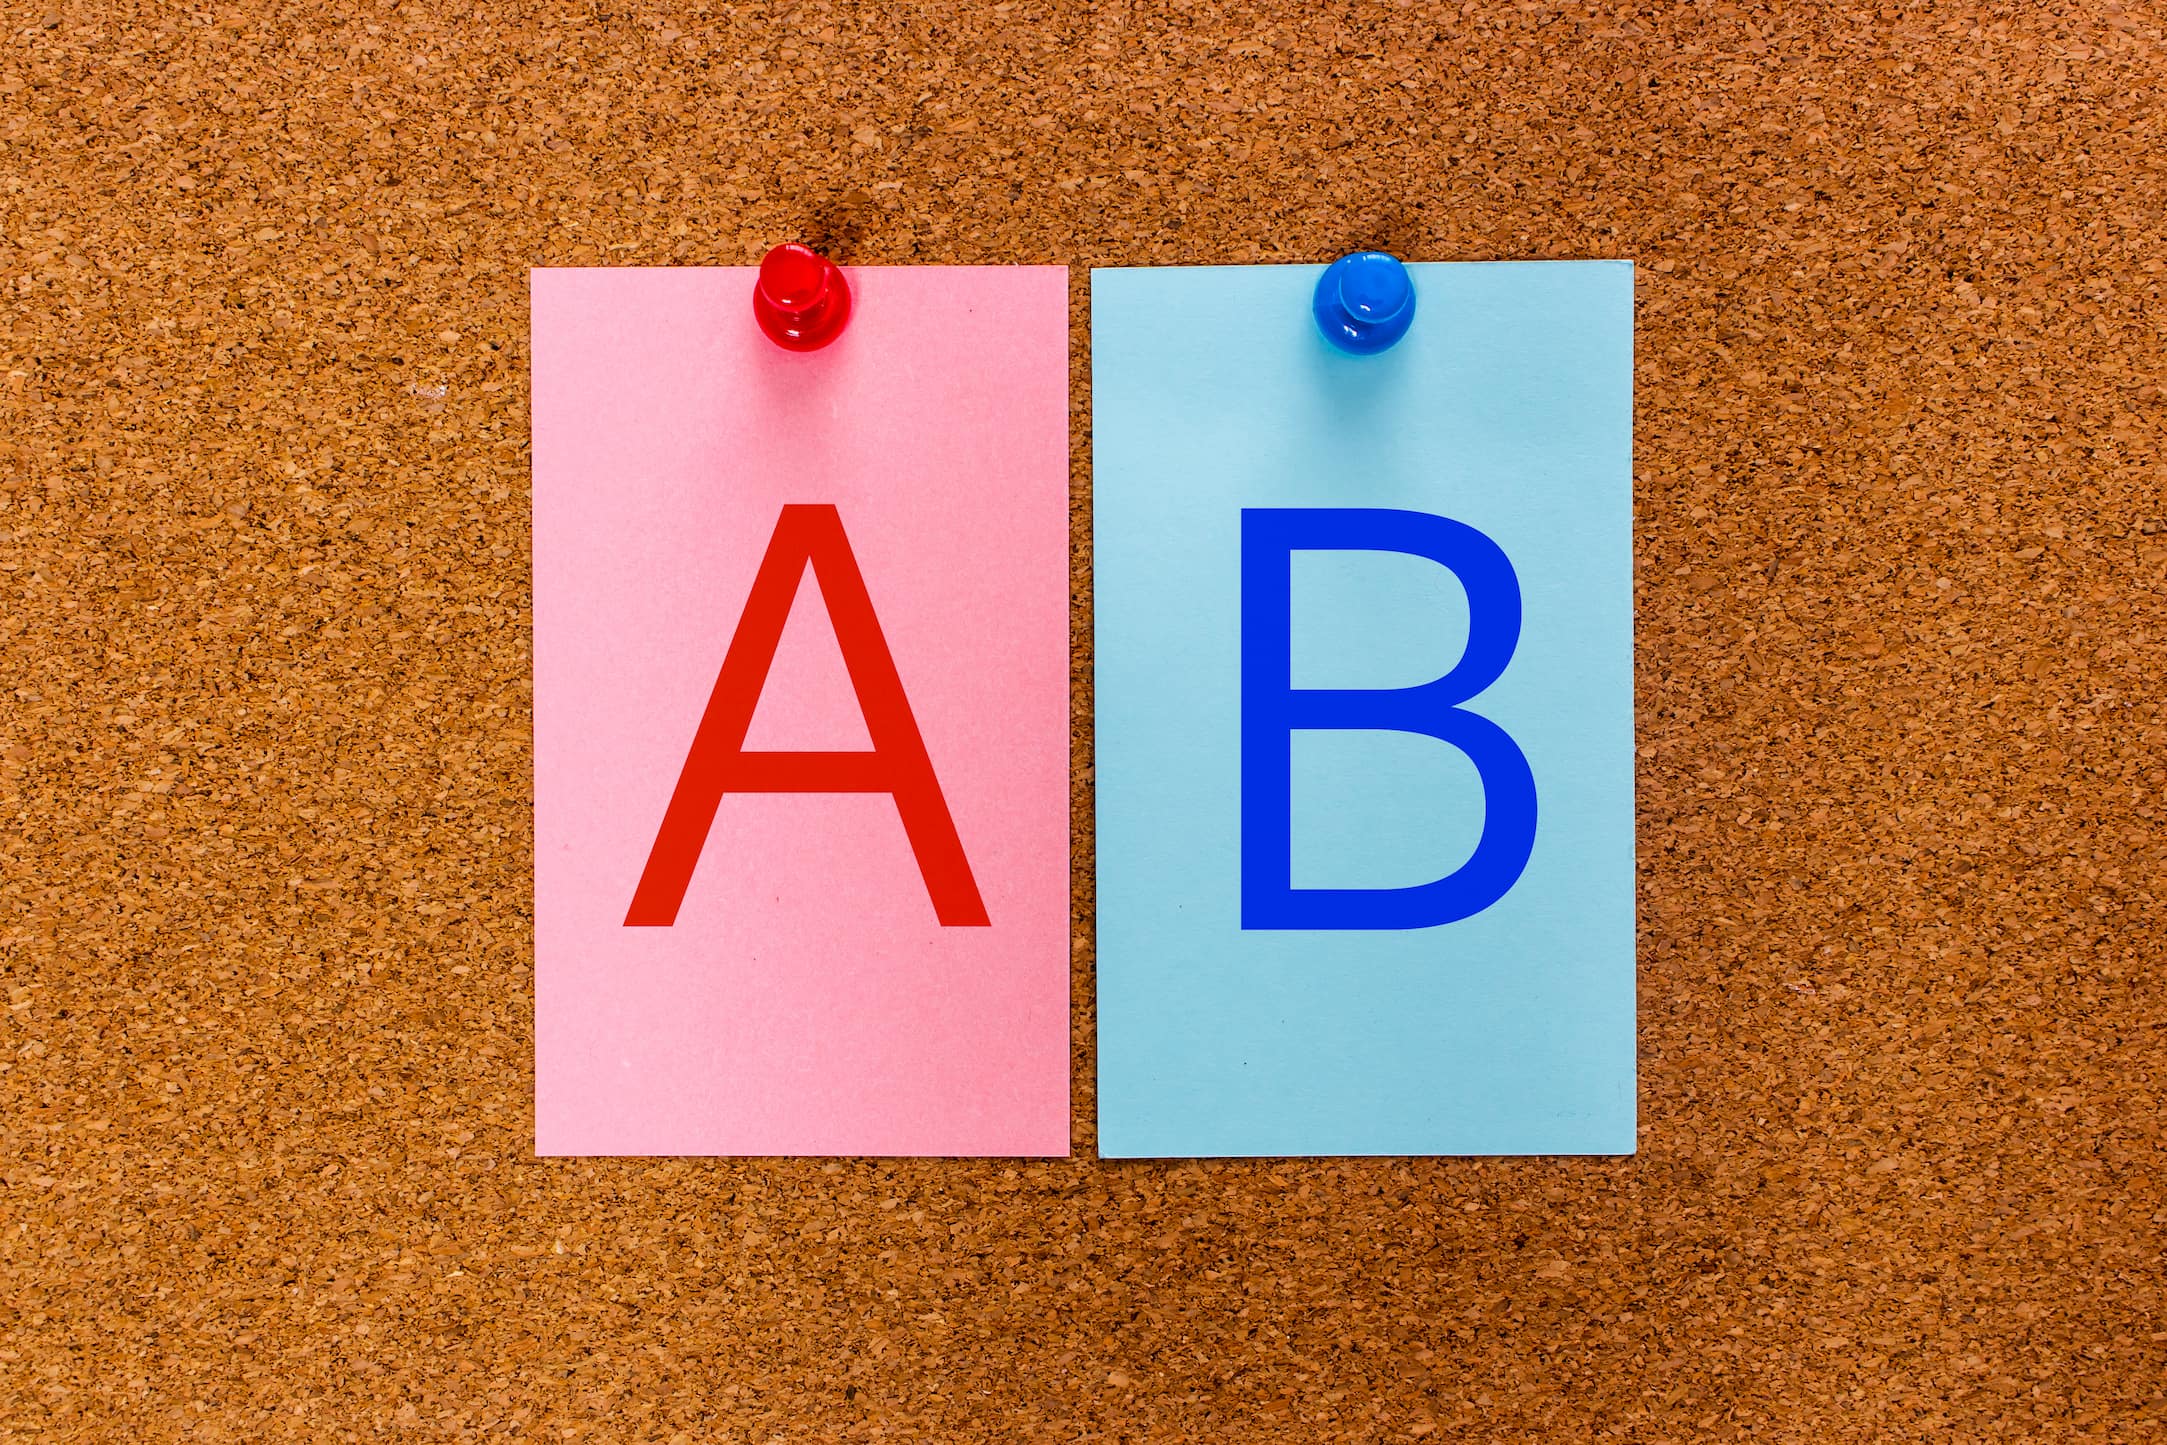 A/B Testing-Put your layouts to the test